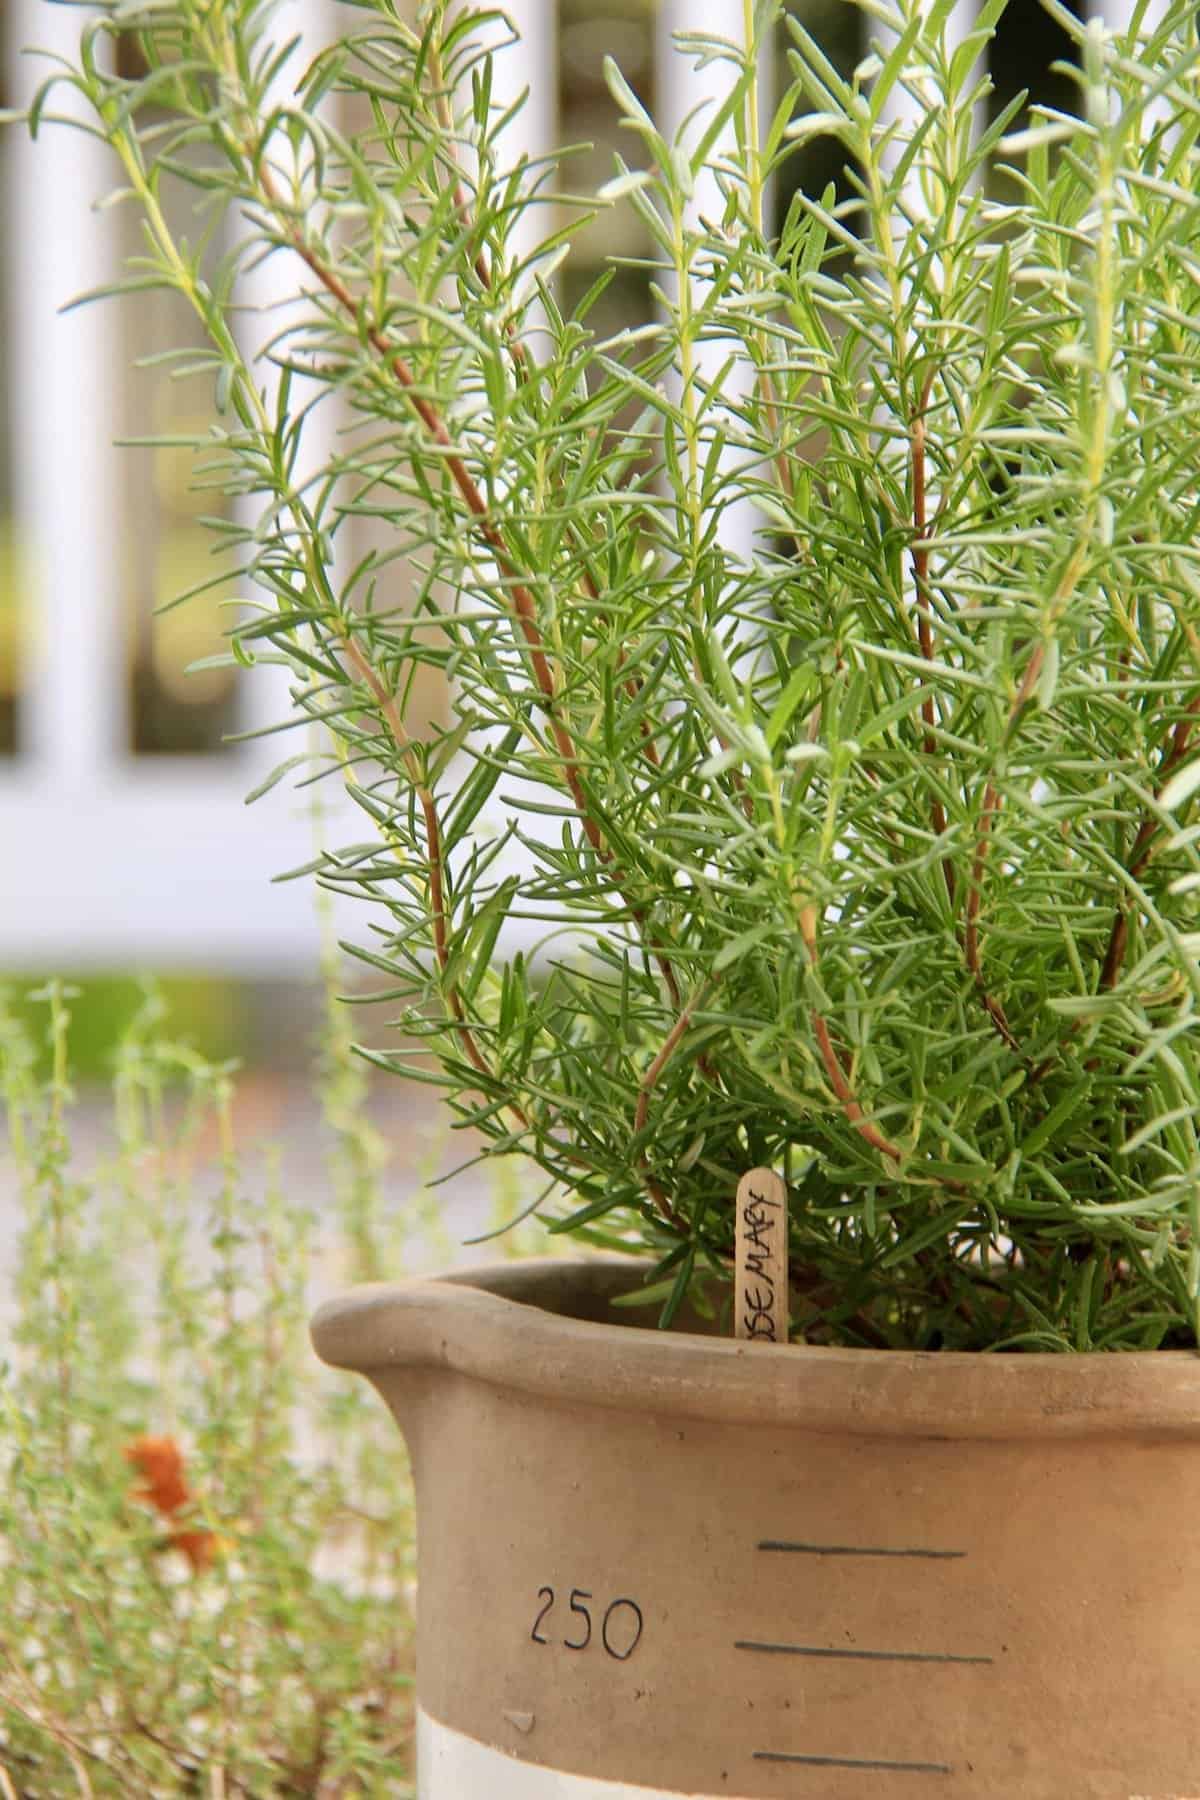 5 best edible plants for a balcony garden | home for the harvest